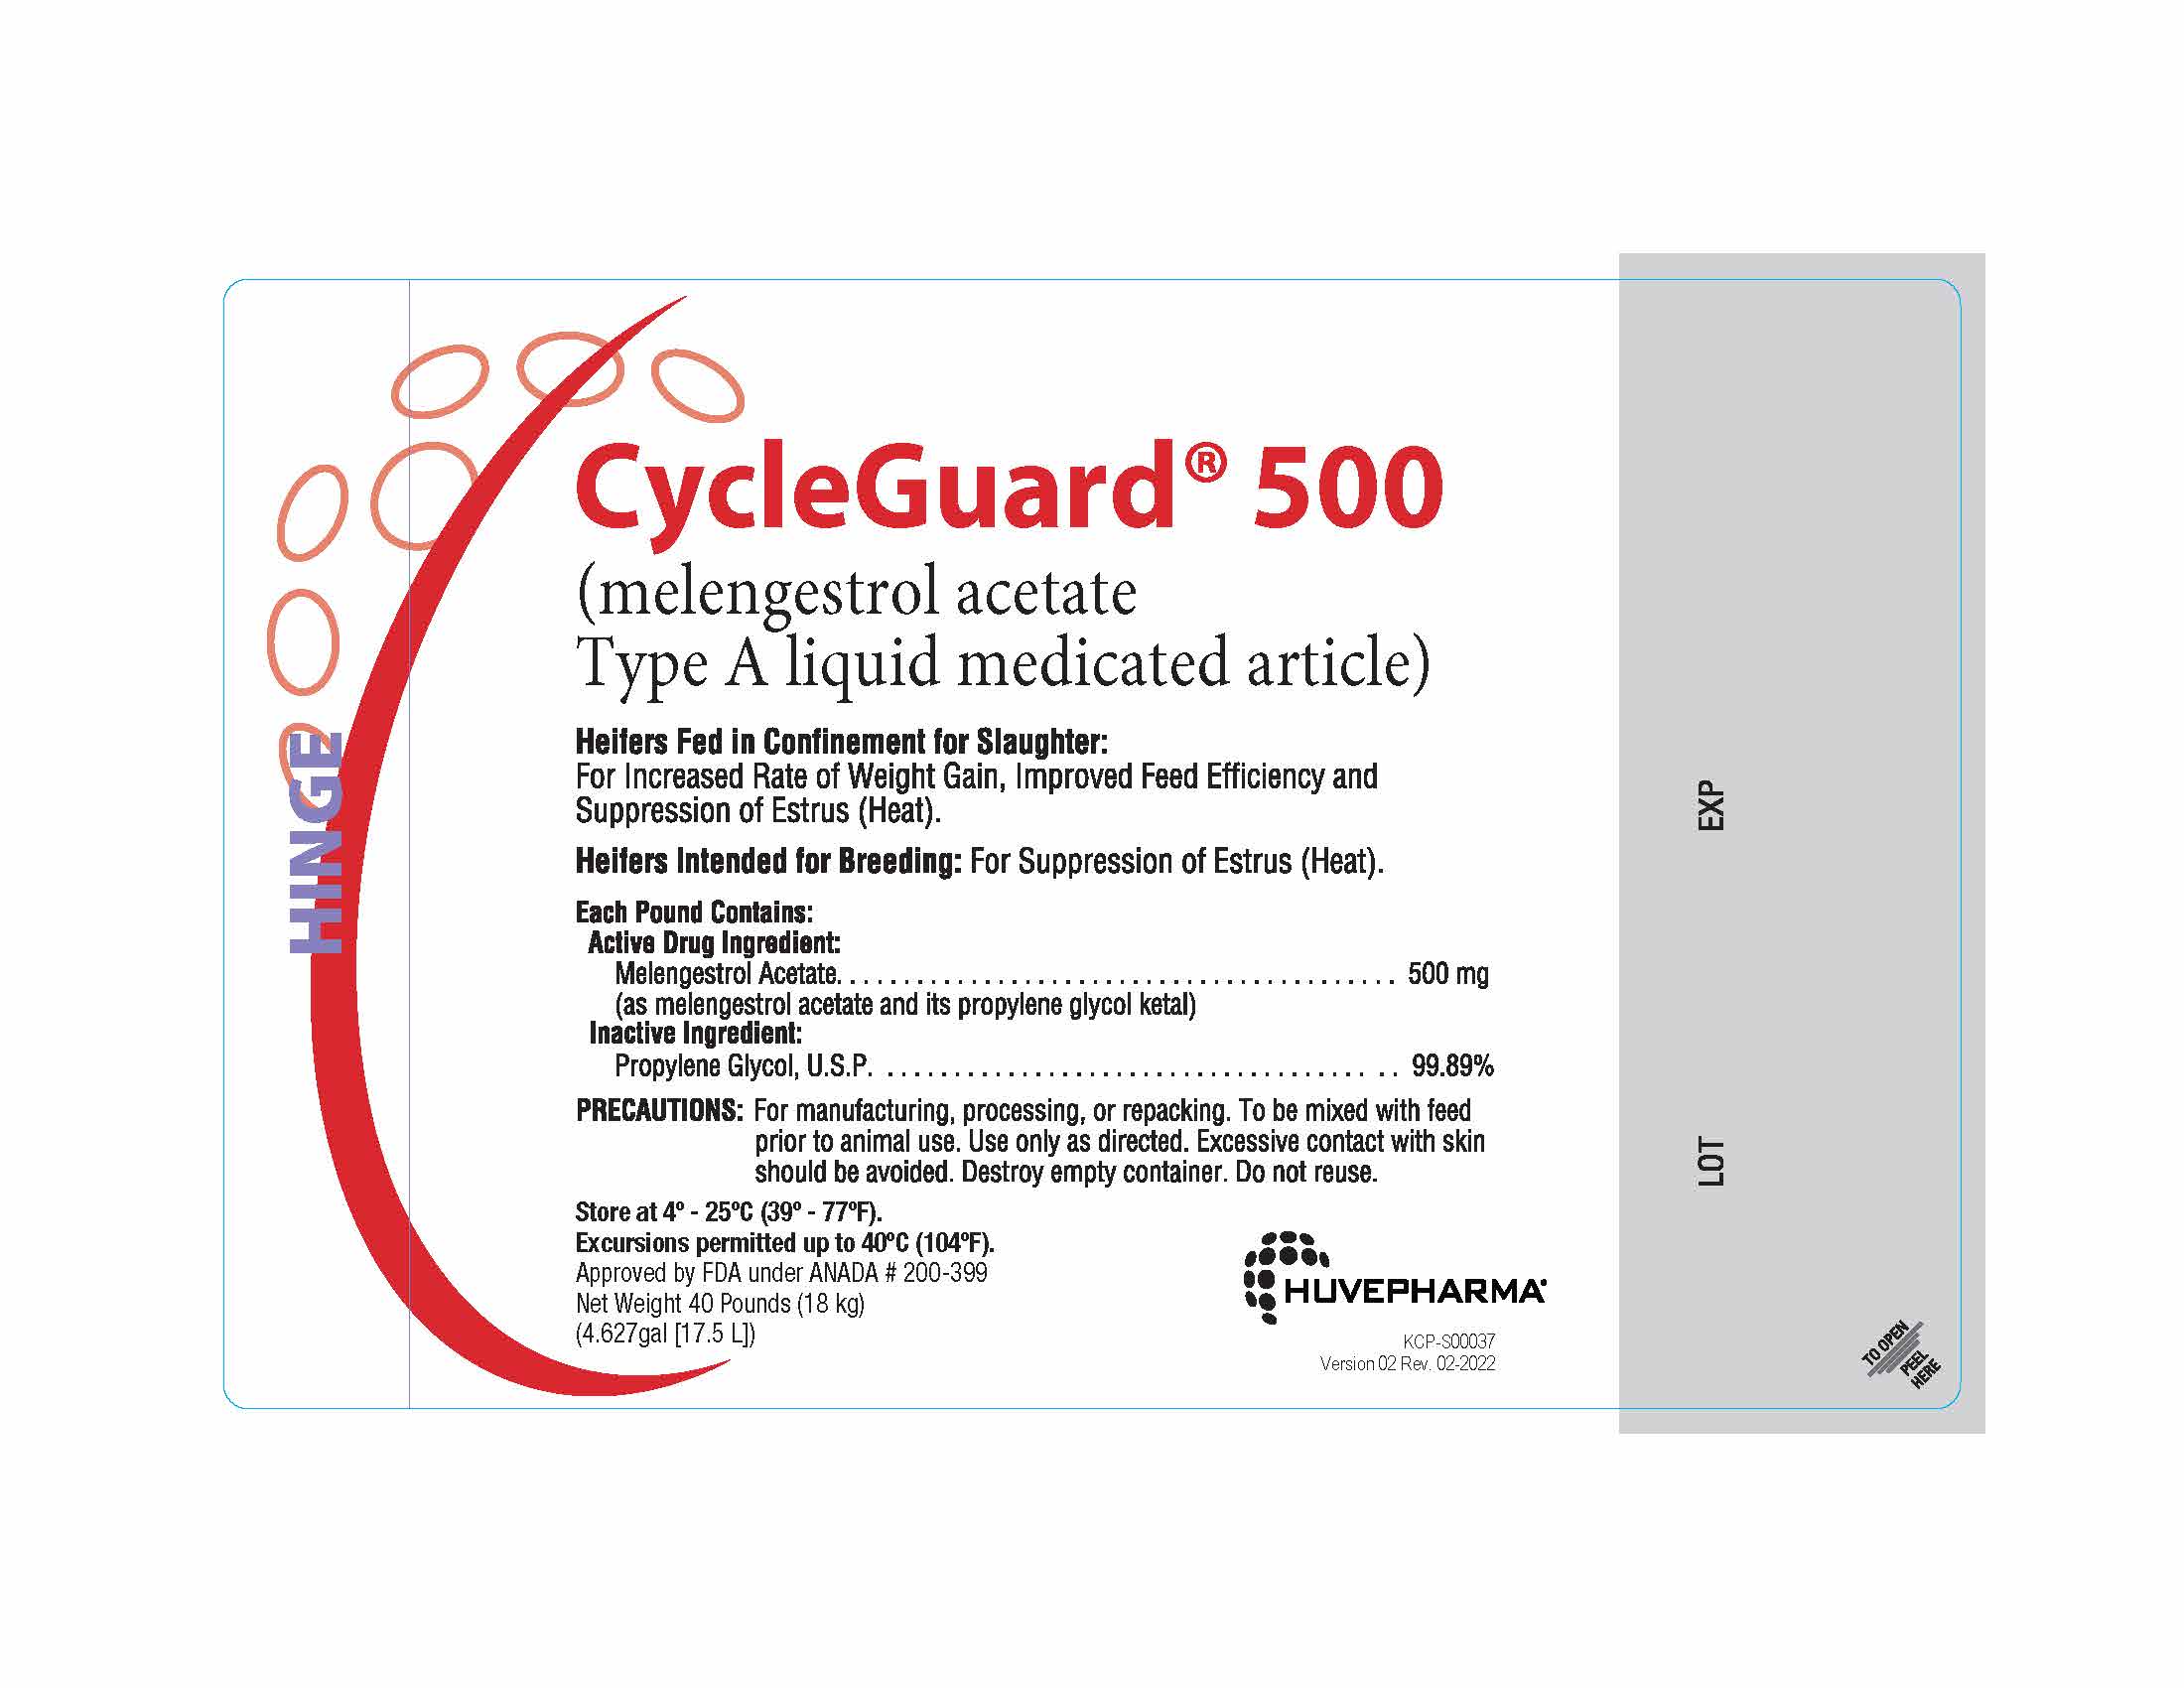 CycleGuard 500 label page 1